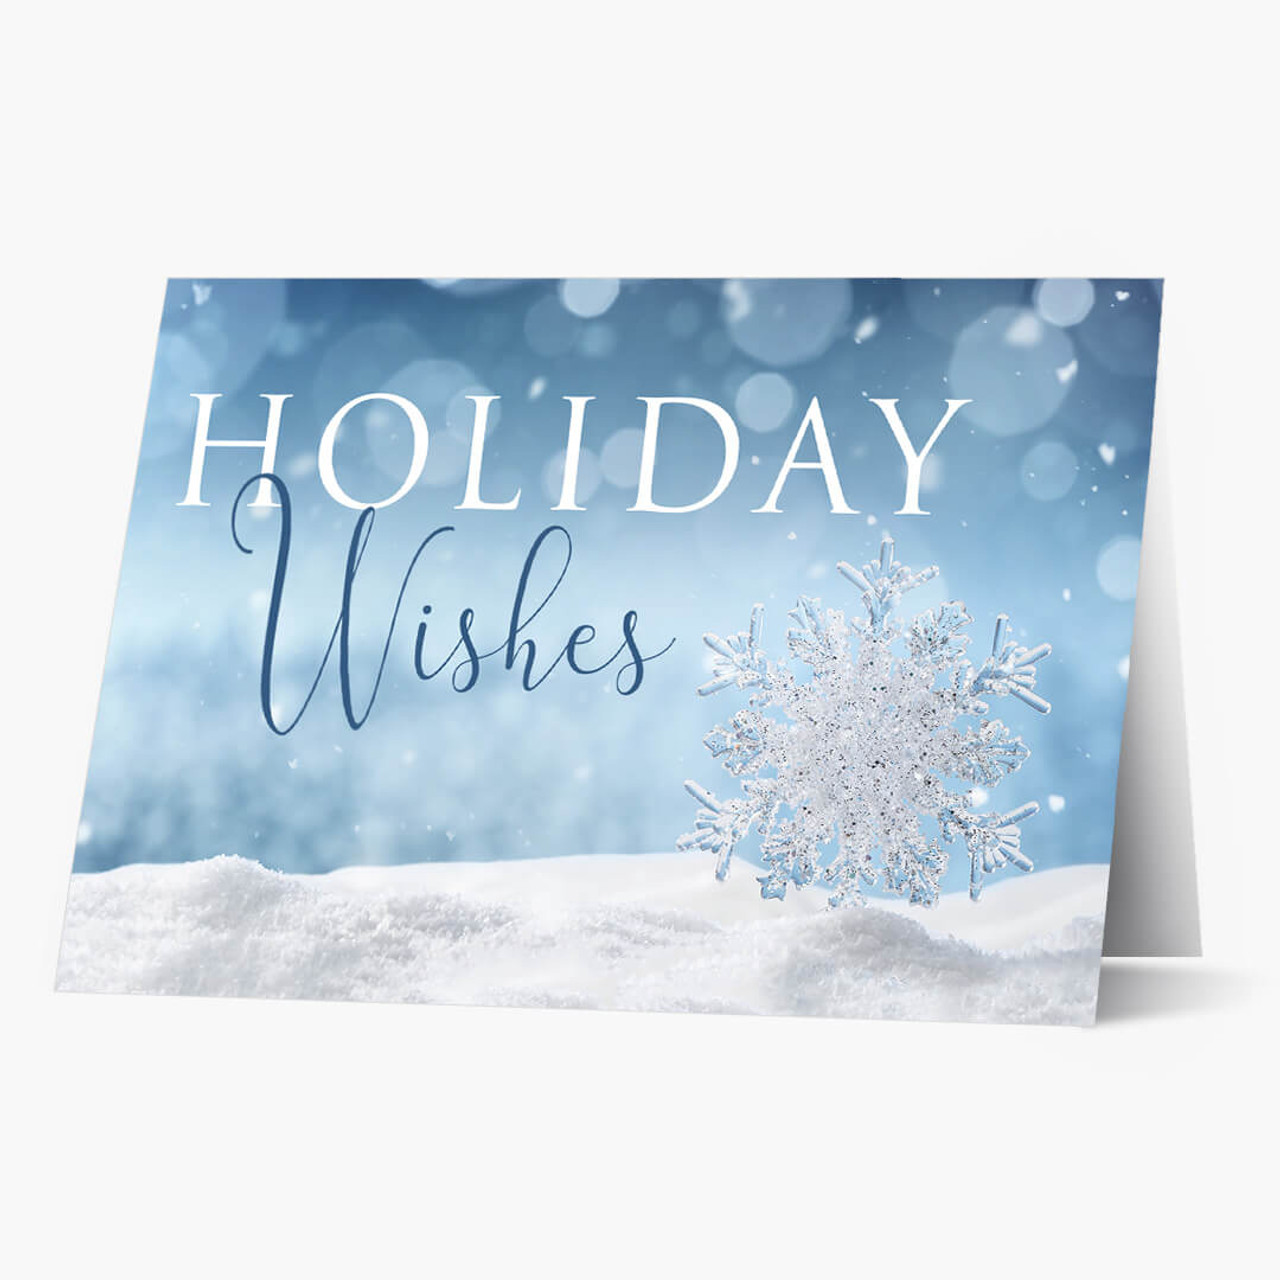 holiday wishes from business